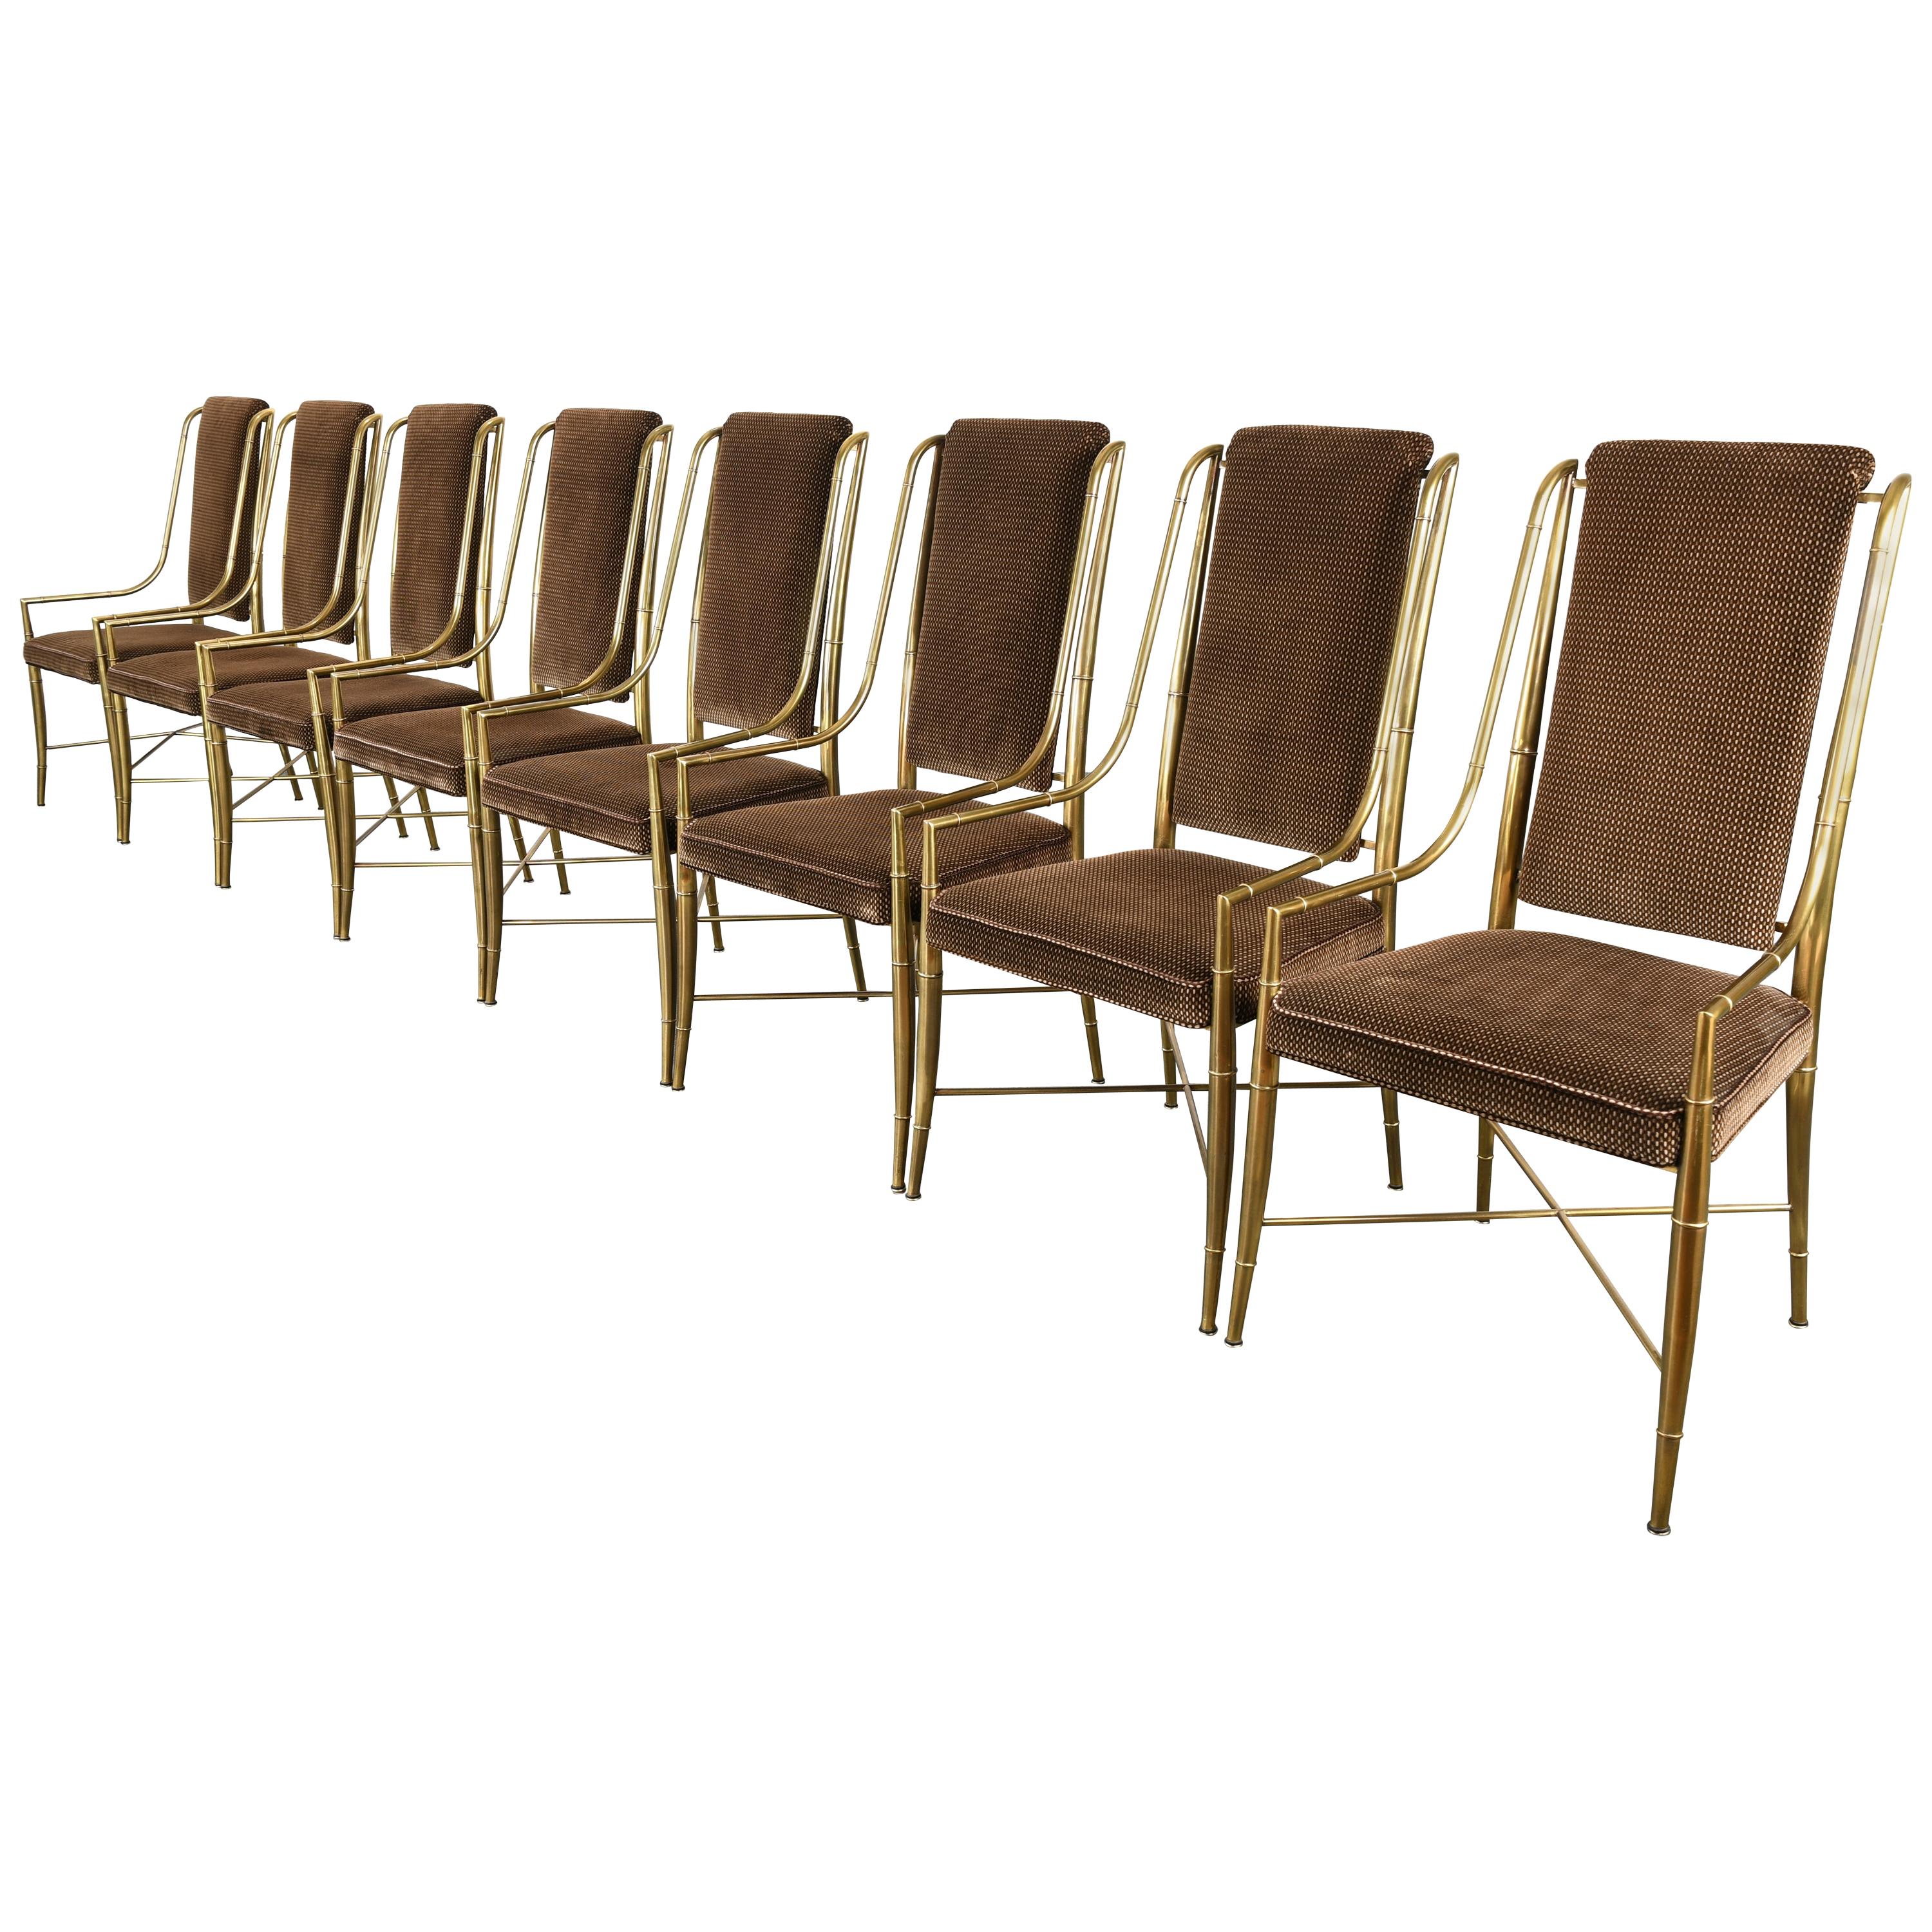 "The Imperial Chair" Set of Eight by Weiman / Warren Lloyd for Mastercraft 1970s